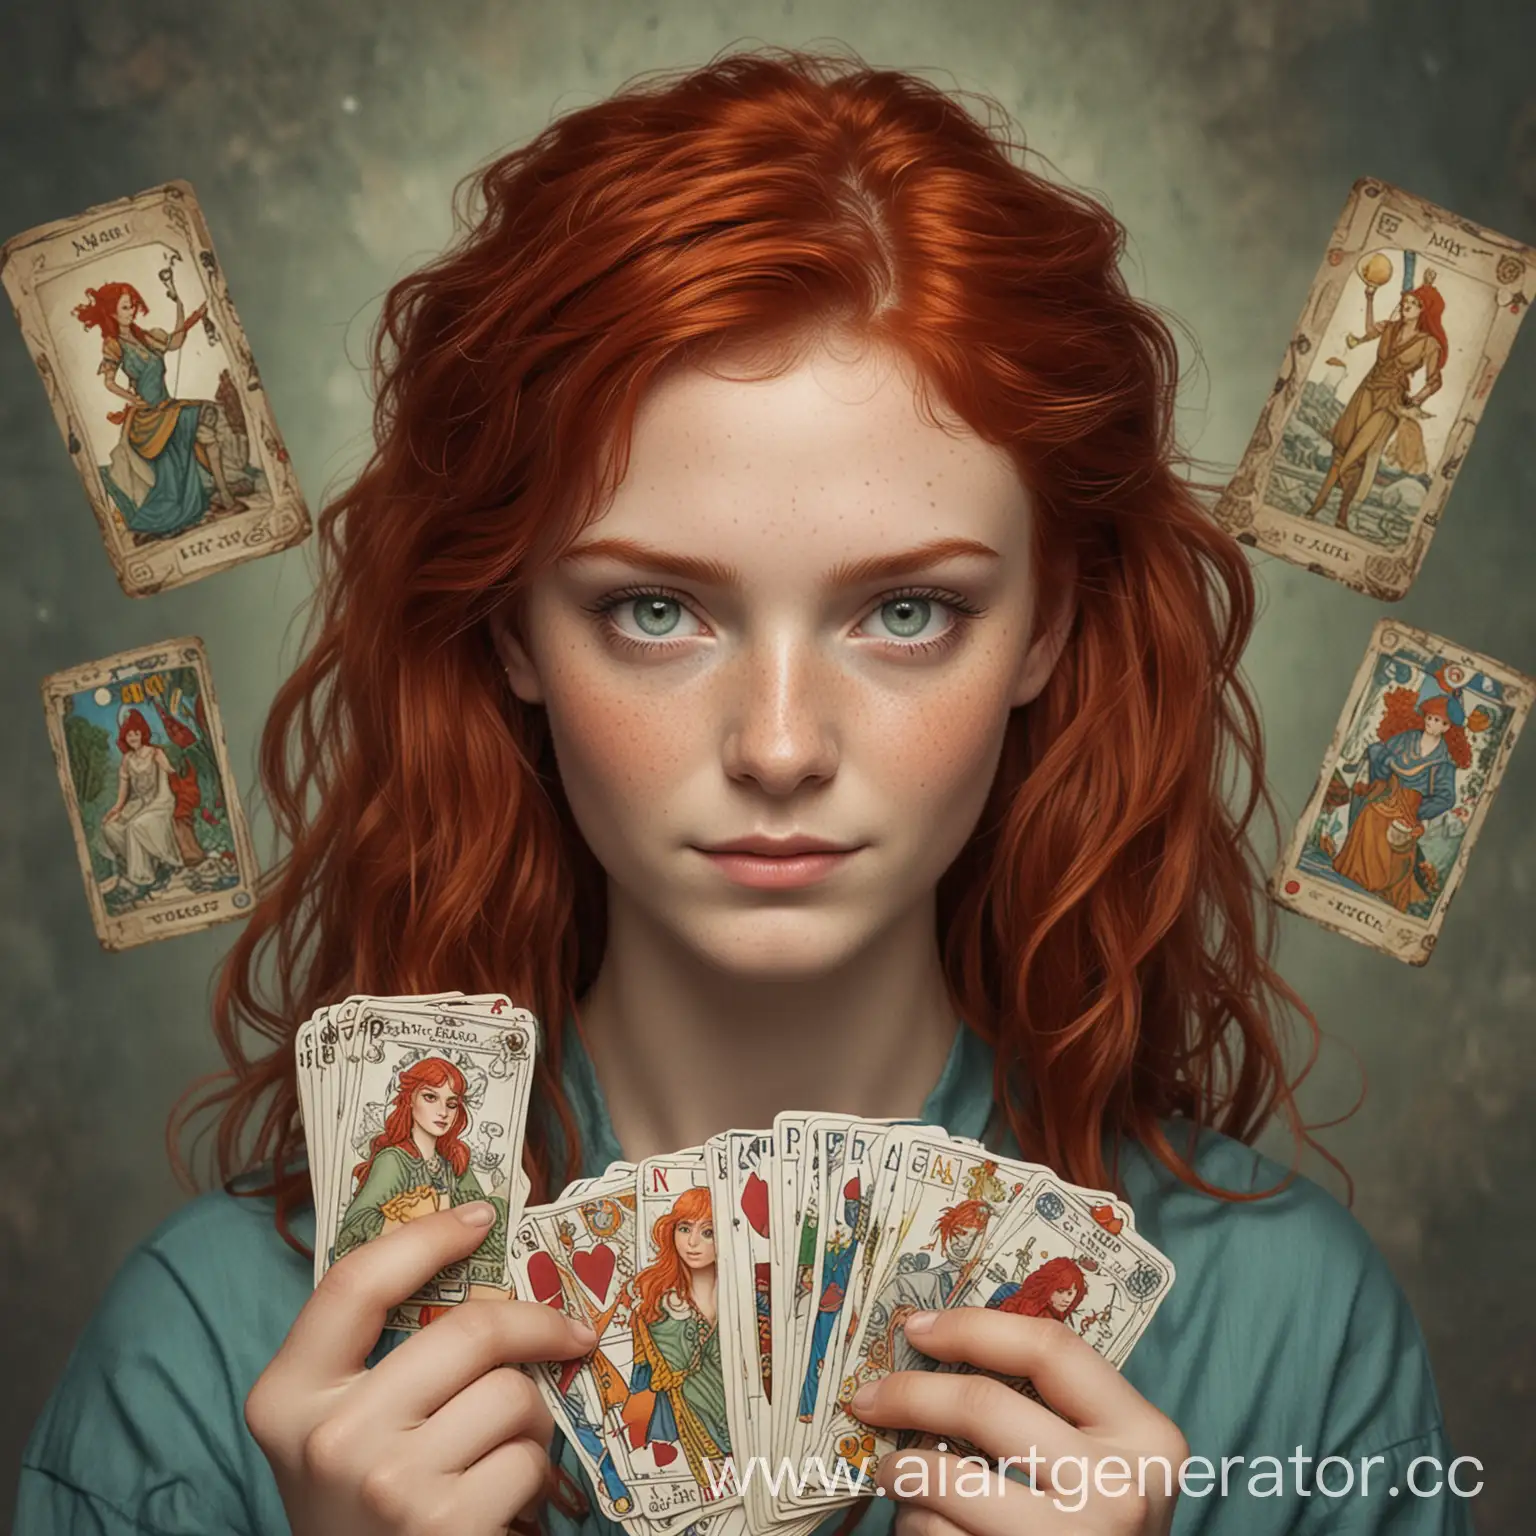 Young-Tarologist-with-Red-Hair-Holding-Tarot-Cards